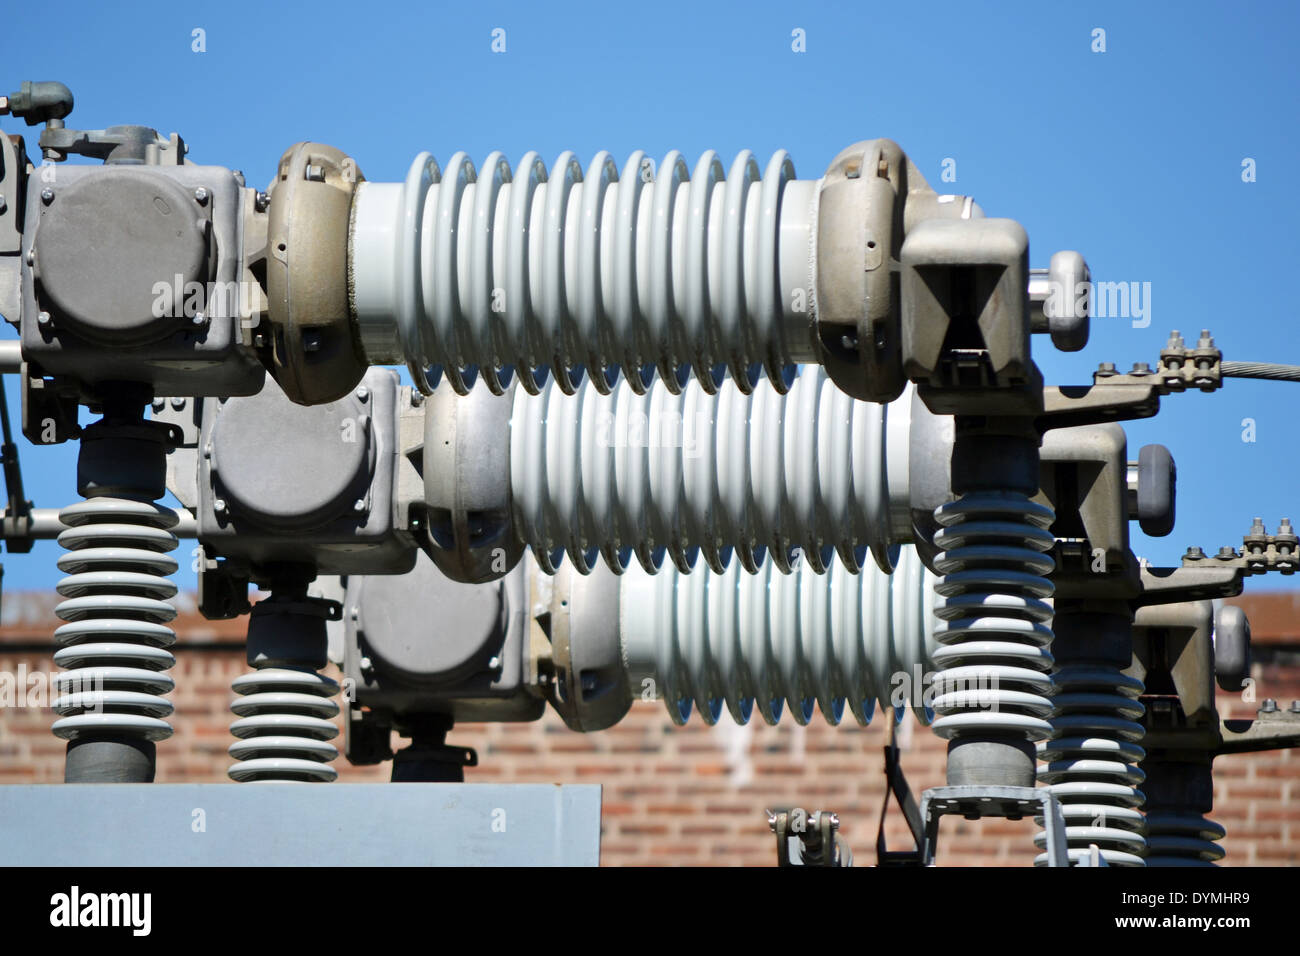 A view of a high voltage substation with switches and insulators Stock Photo